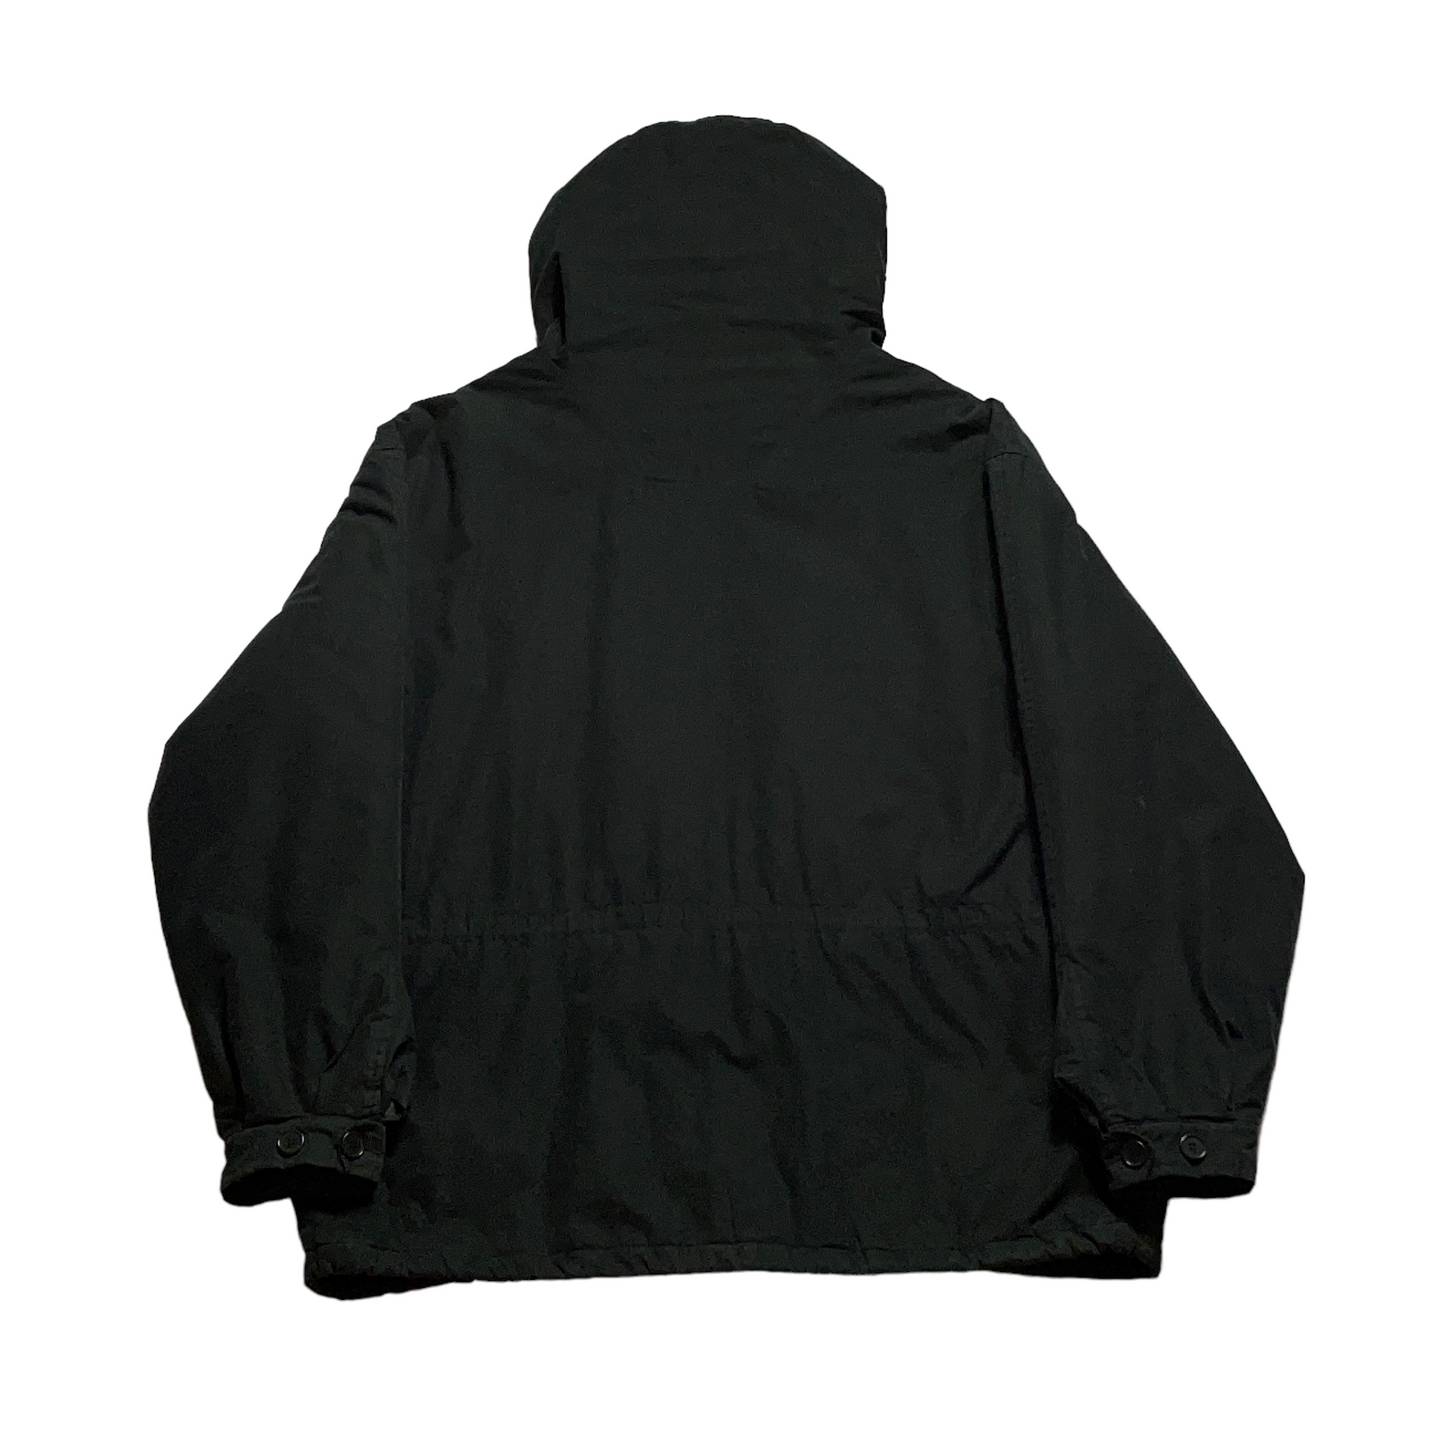 Helmut Lang FW99 Hooded Military Jacket